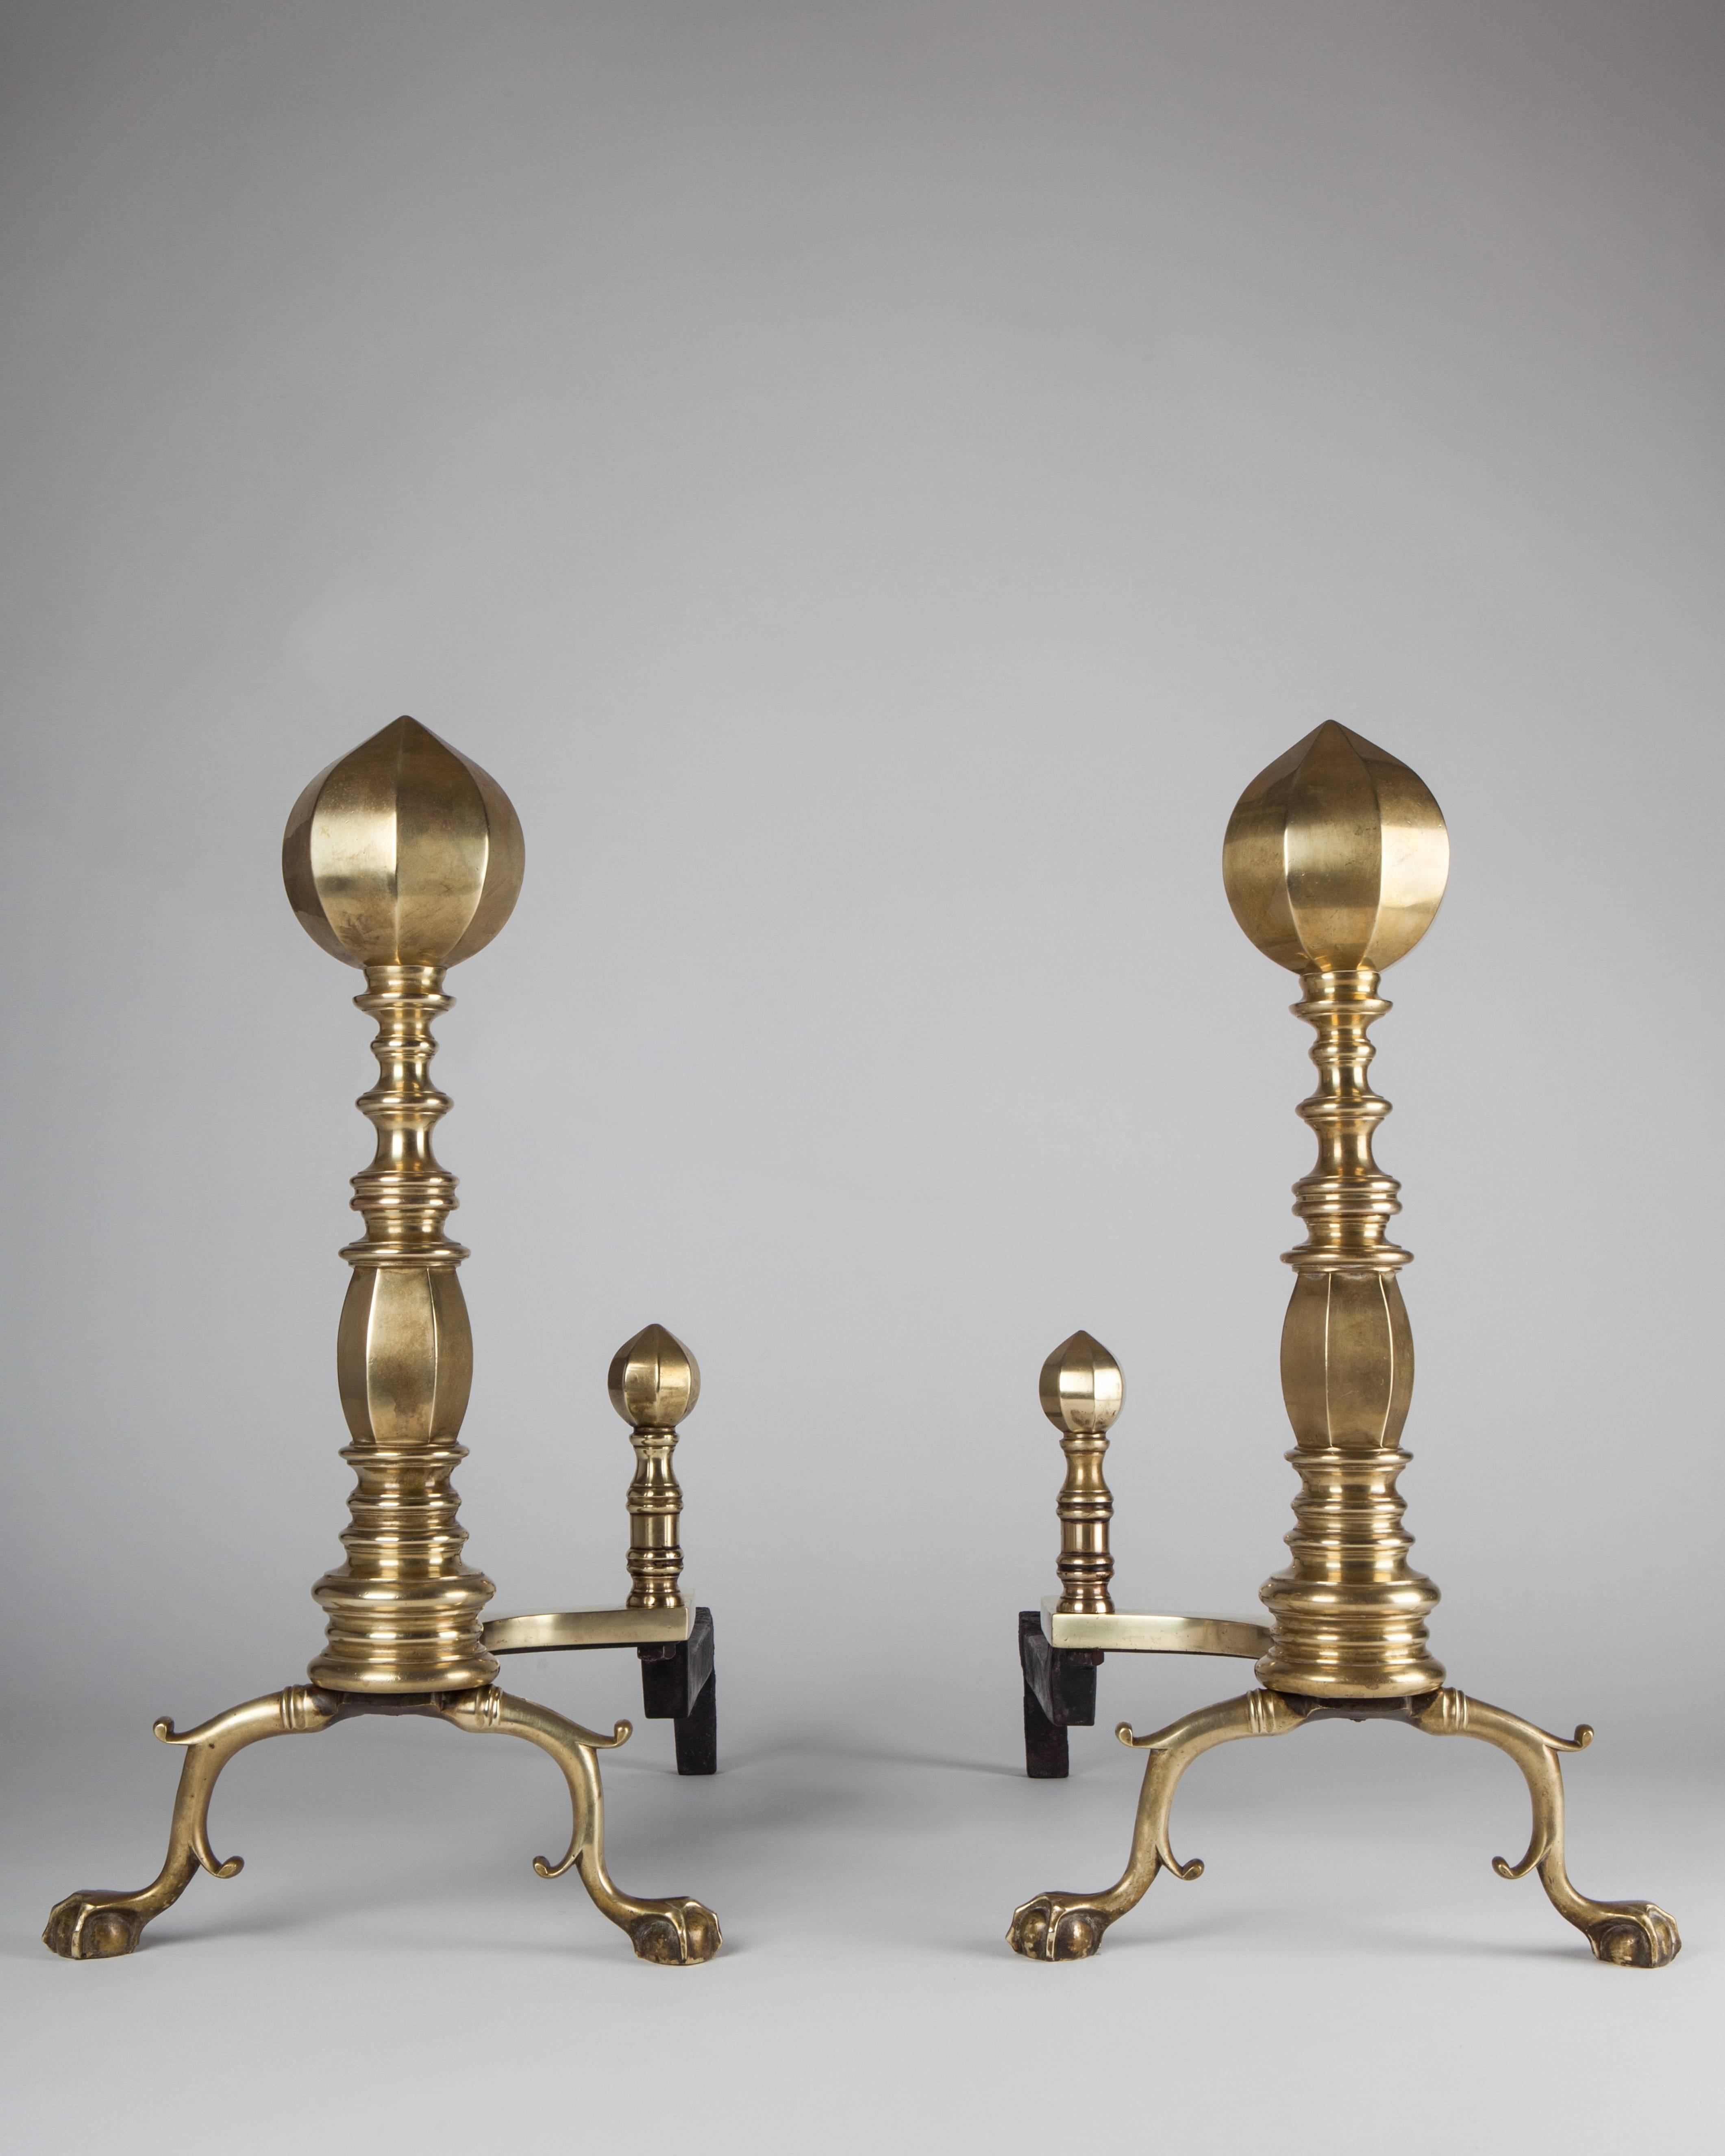 AFP0538.
A pair of large antique brass and wrought iron baroque andirons with matching log-stops.

Dimensions:
Overall: 23